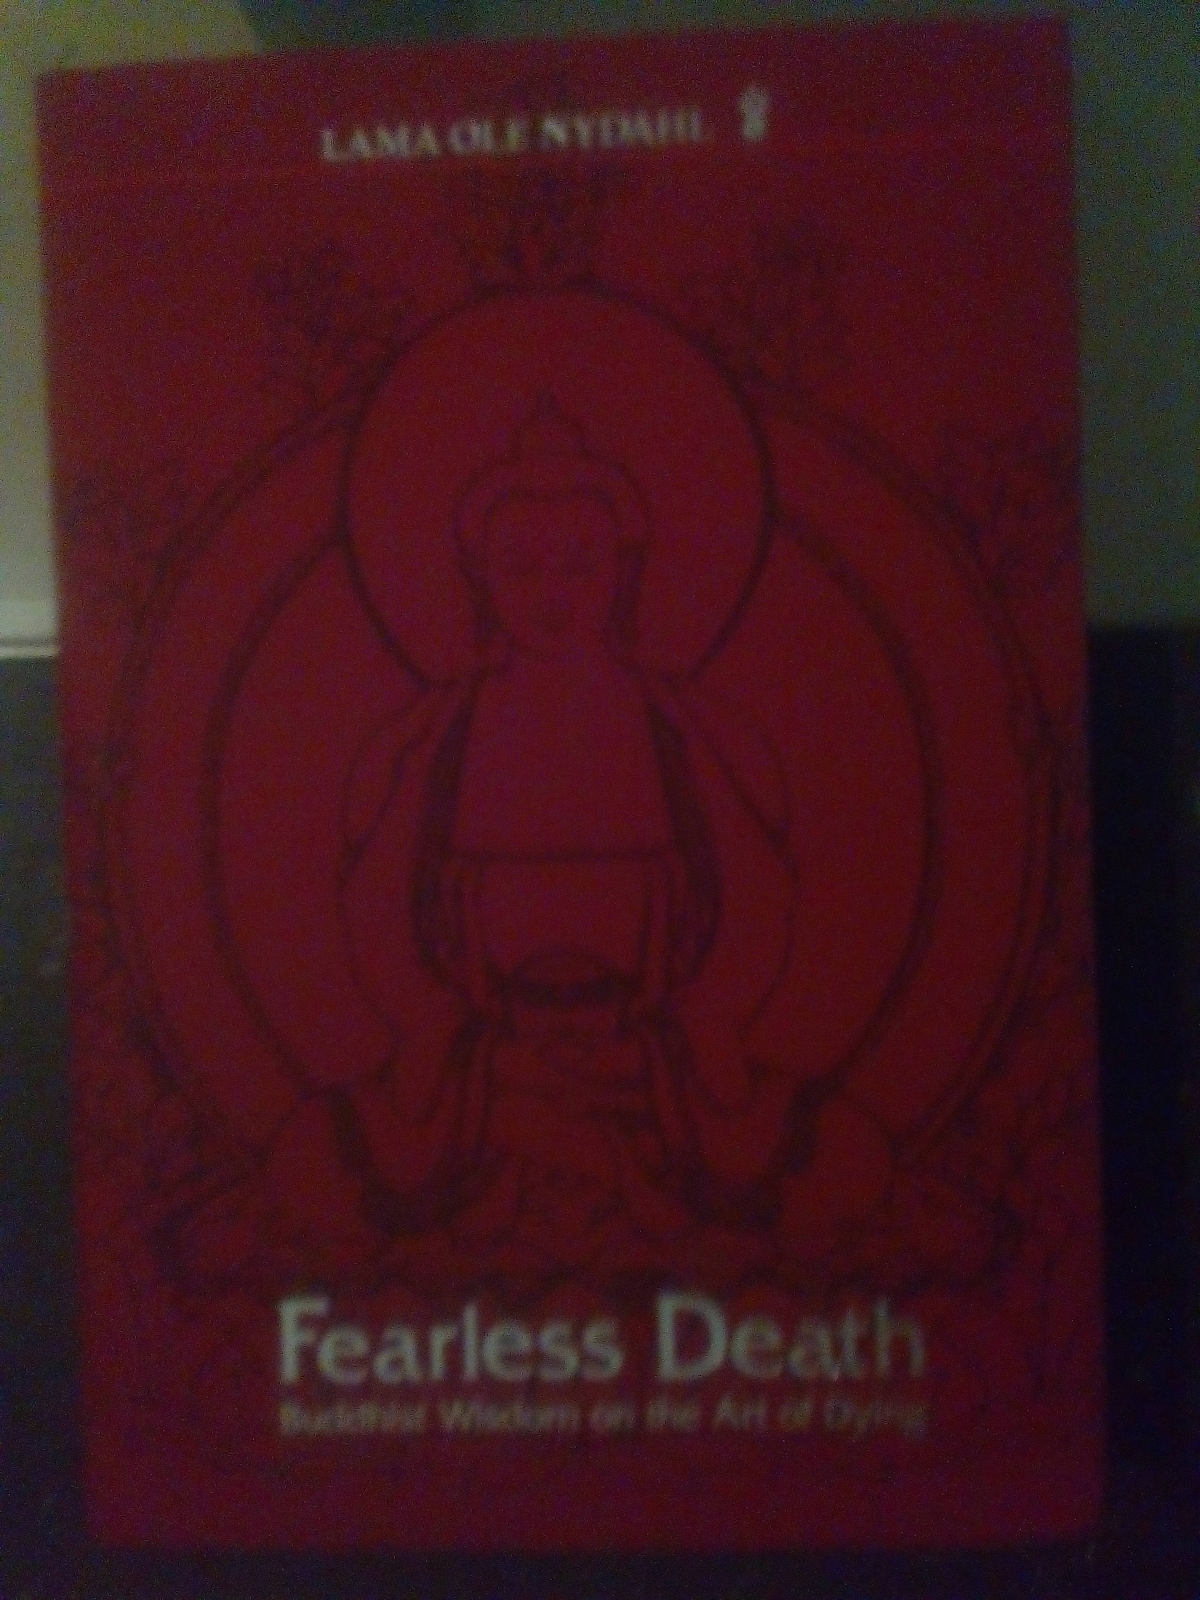 'Fearless Death': Buddhist Wisdom on the Art of Dying.